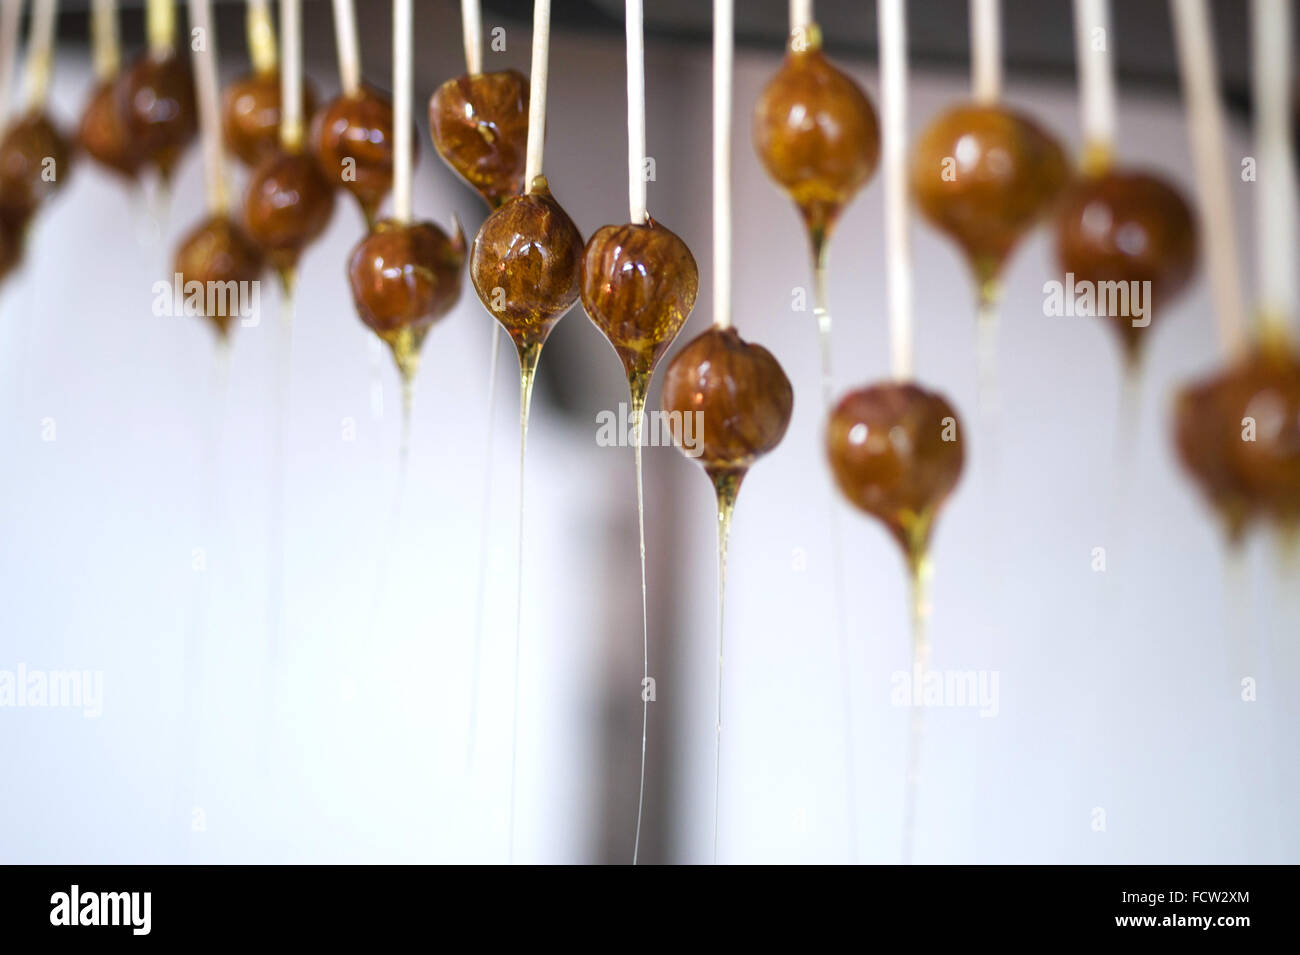 Homemade toffee lollipops hanging in kitchen Stock Photo